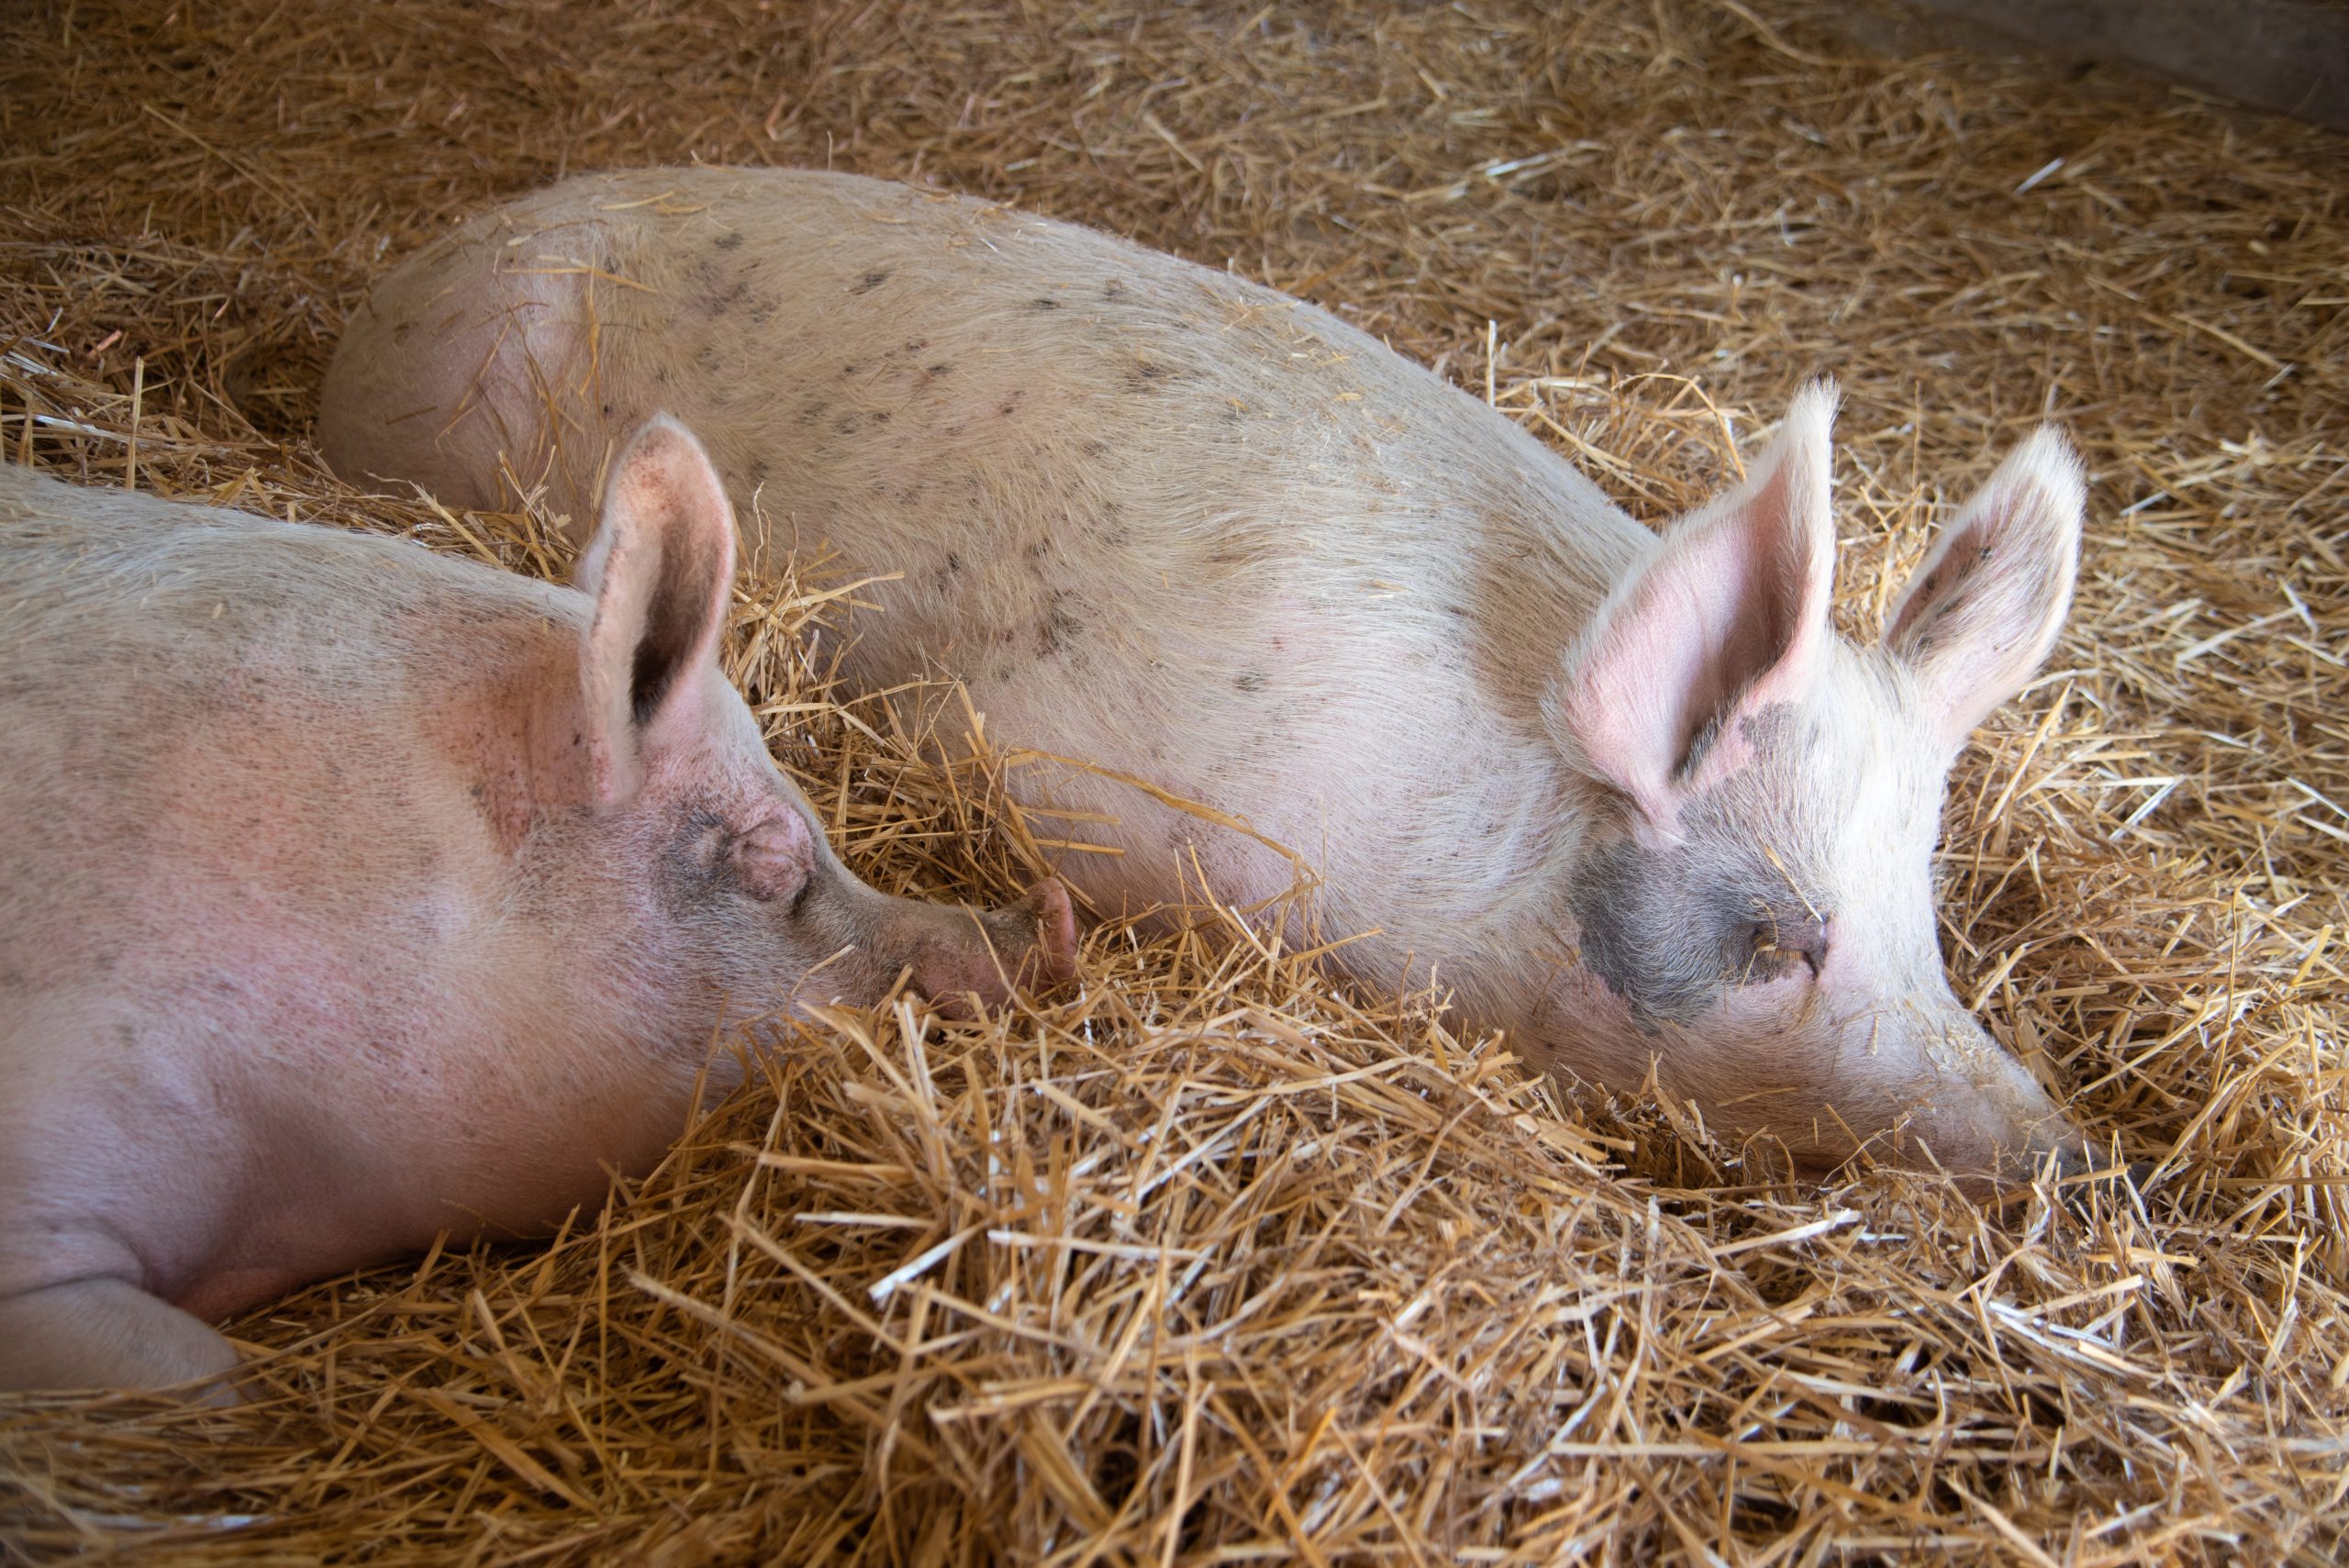 Eric and Rory pigs at Farm Sanctuary